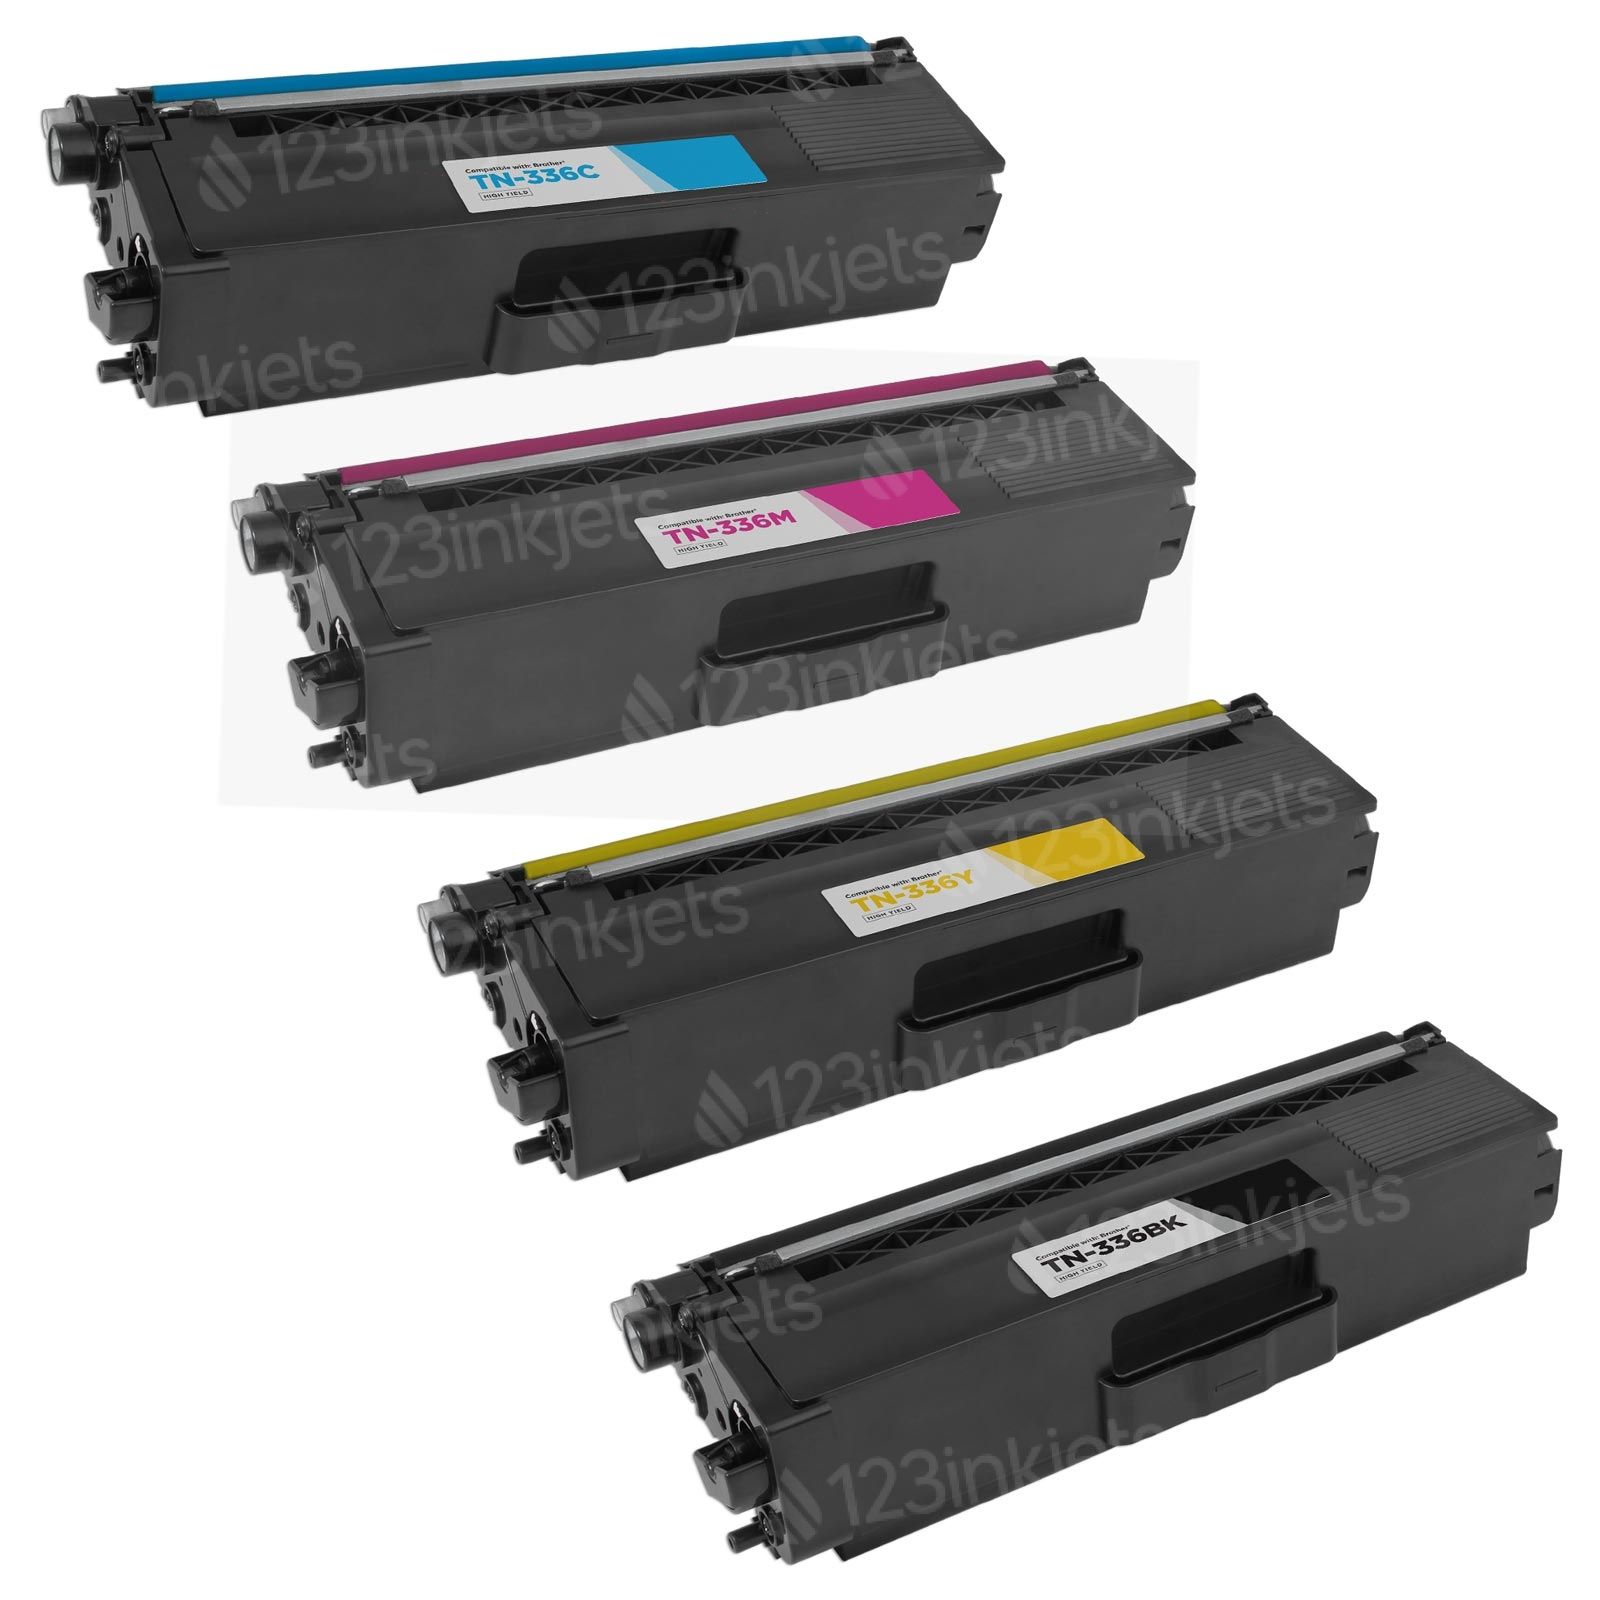 Set of 4 Brother TN336 High Yield Compatible Toner - 123inkjets